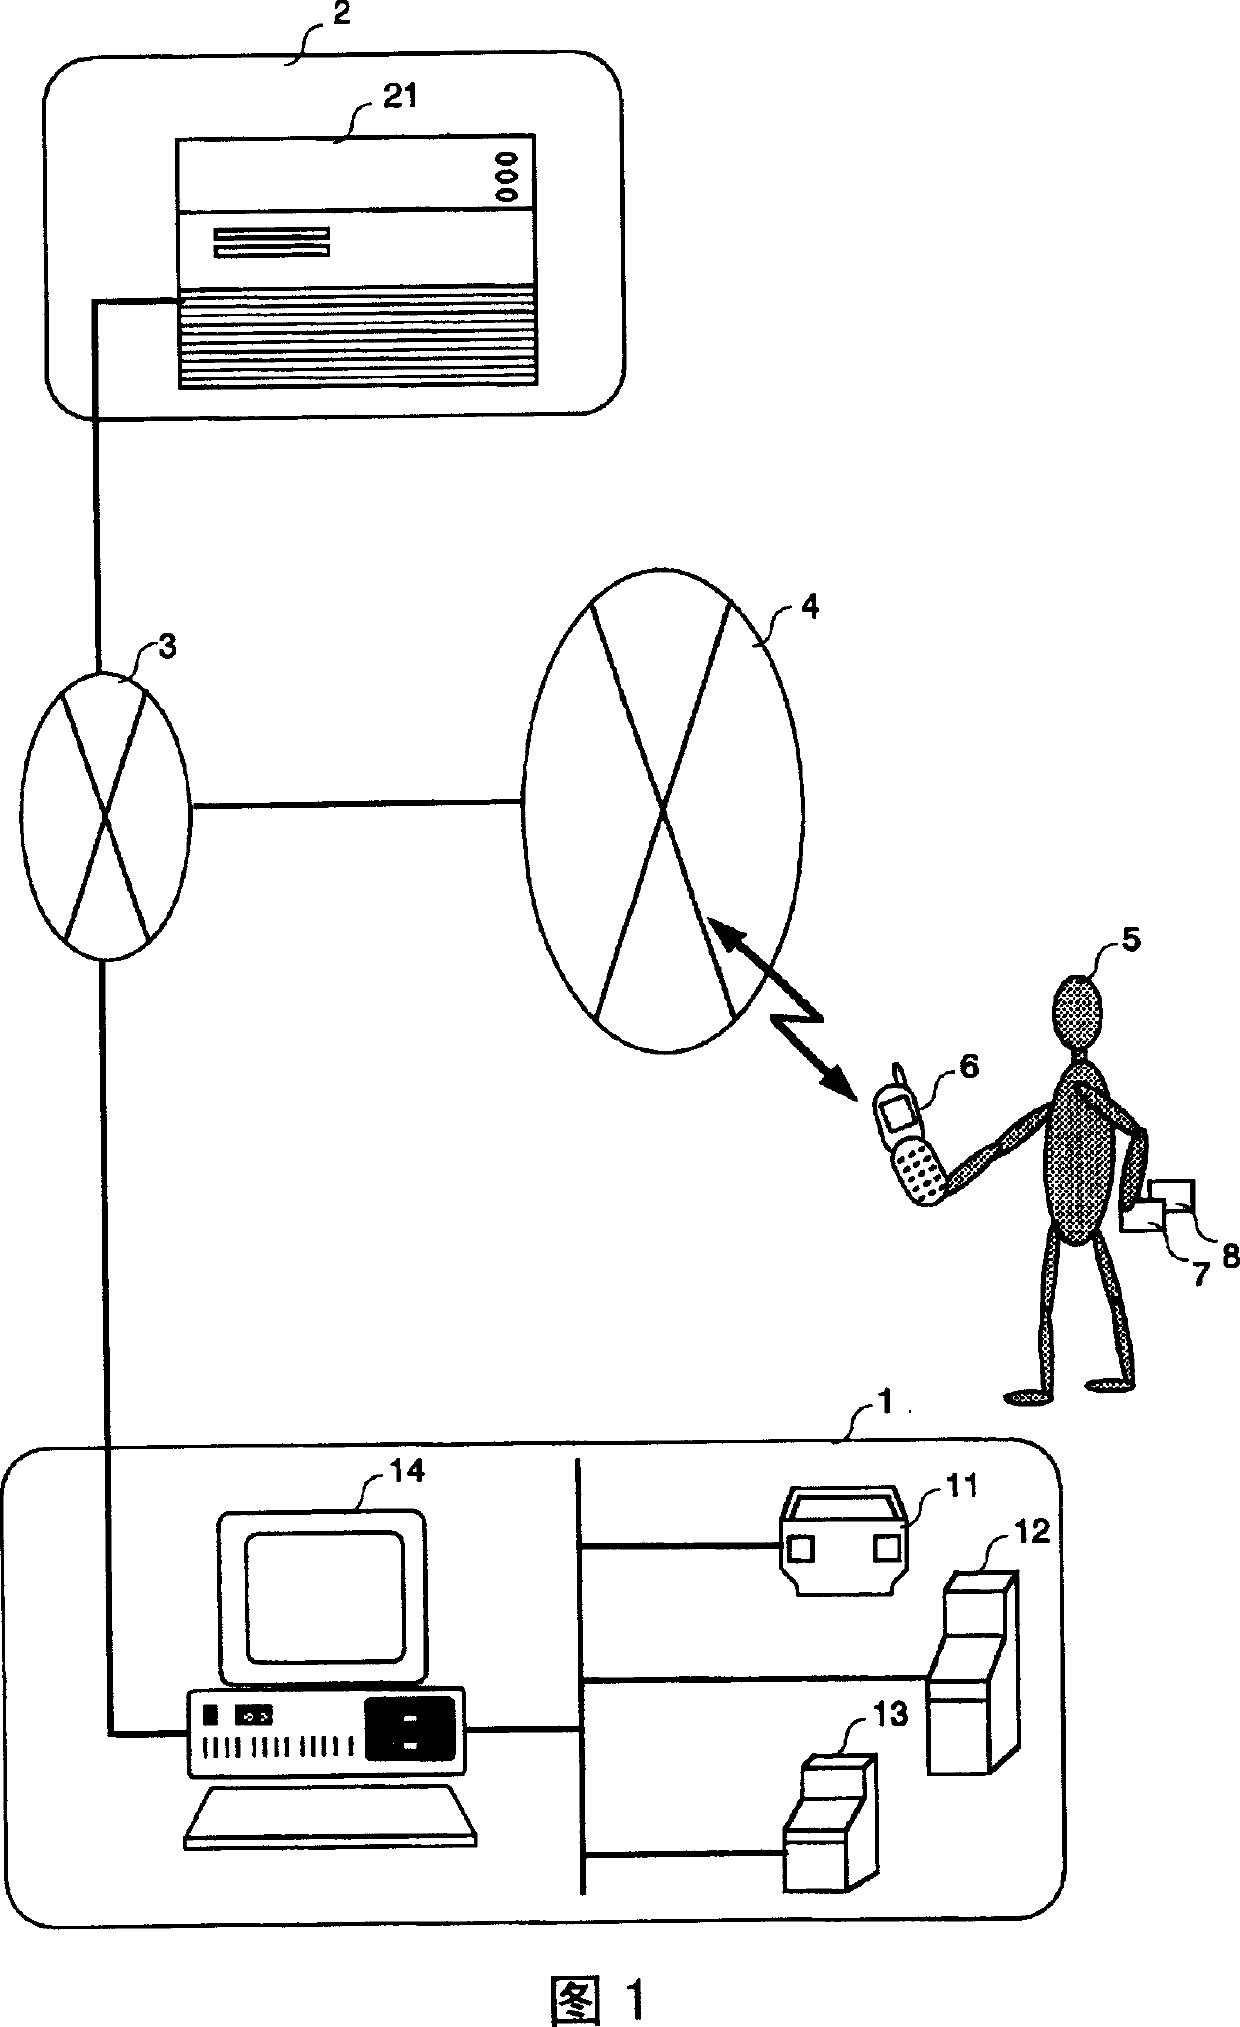 Information distributing system and automatic ticket punch